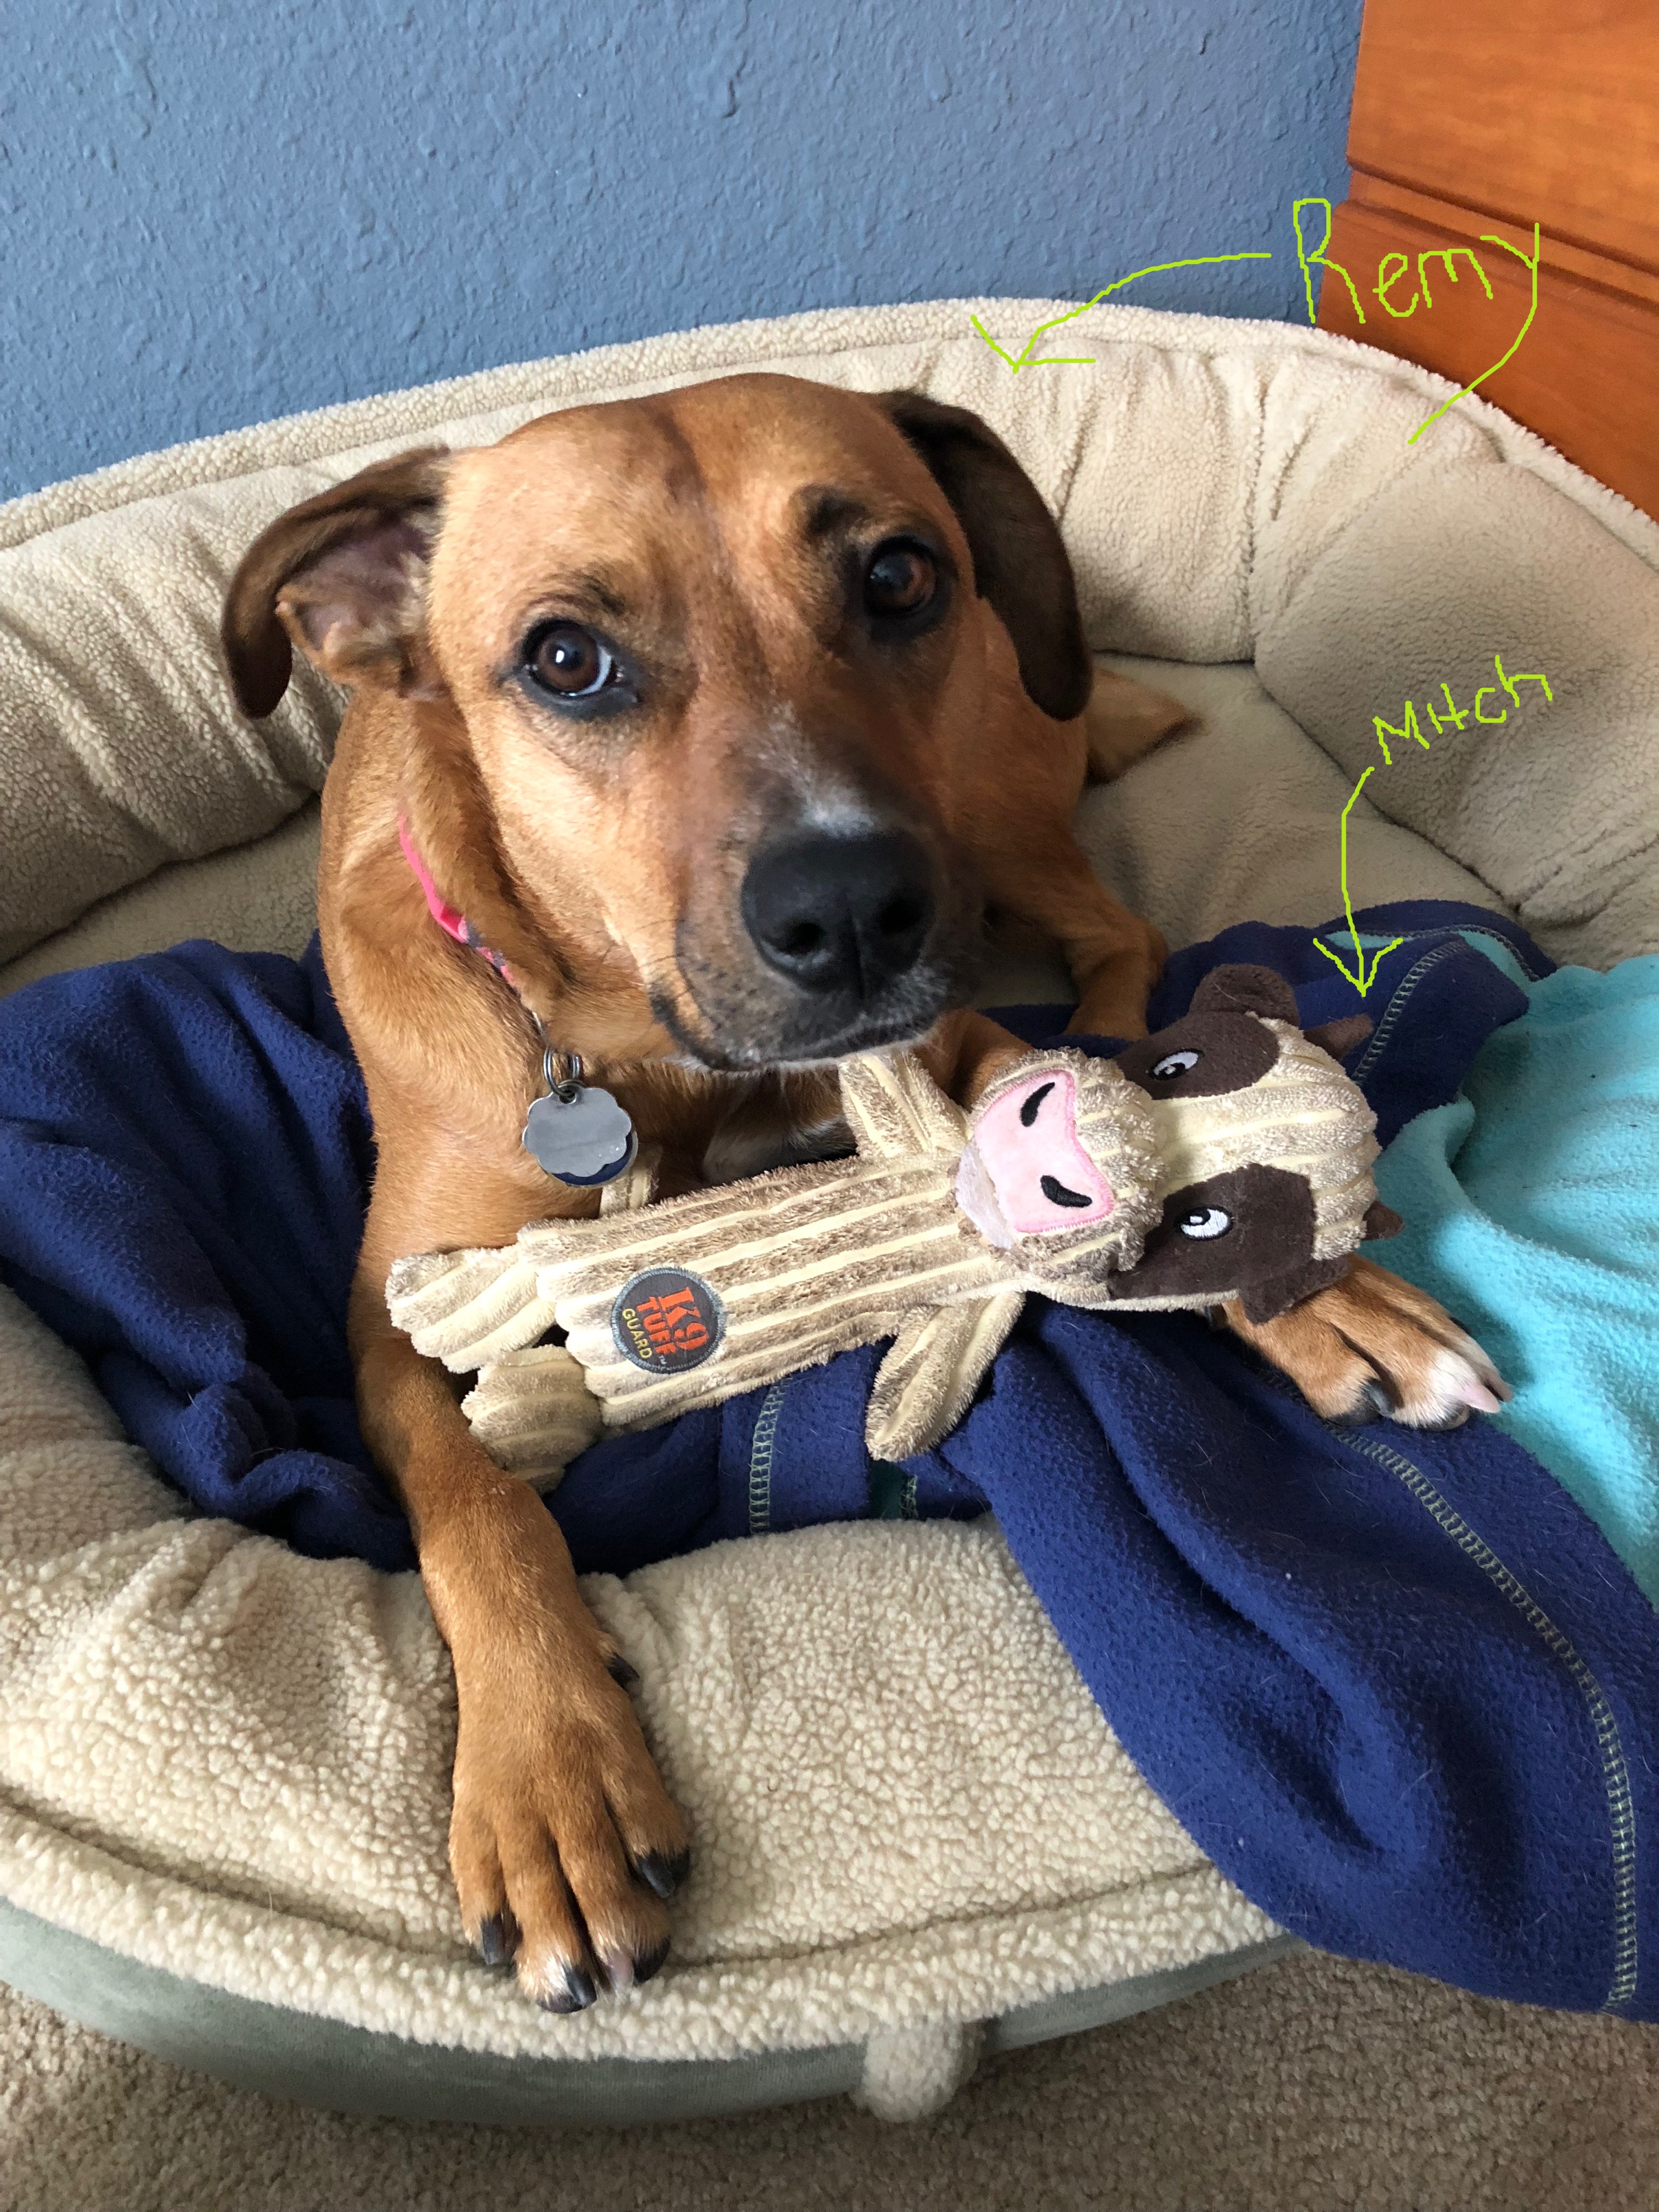 A medium-sized, tan mixed breed dog is laying on a fleecy dog bed. There is also a blue blanket and a stuffed animal cow dog toy in the dog-bed. 